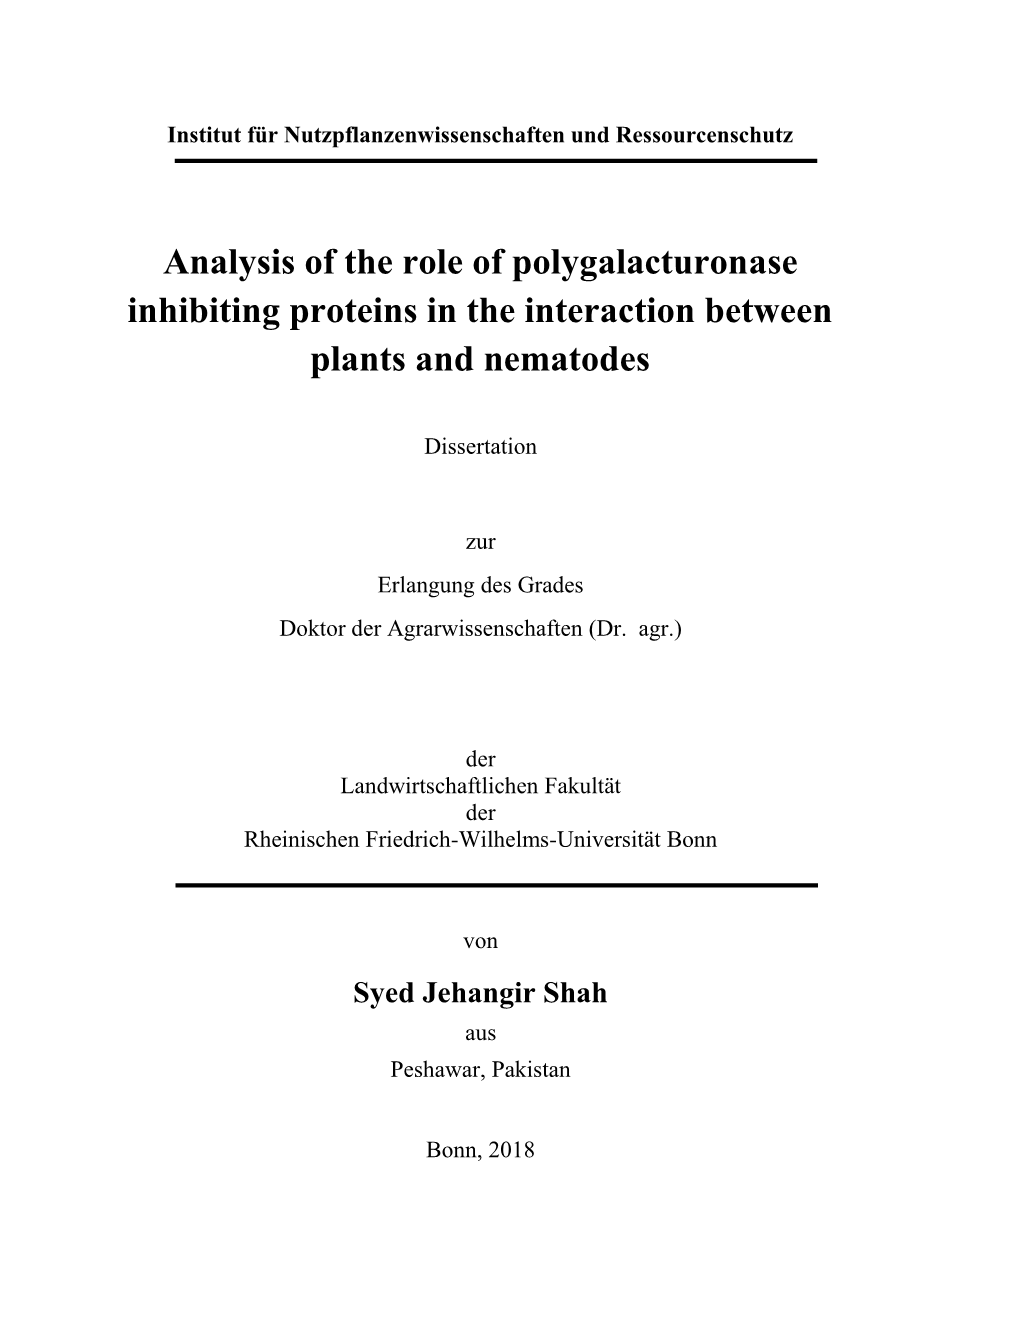 Analysis of the Role of Polygalacturonase Inhibiting Proteins in the Interaction Between Plants and Nematodes